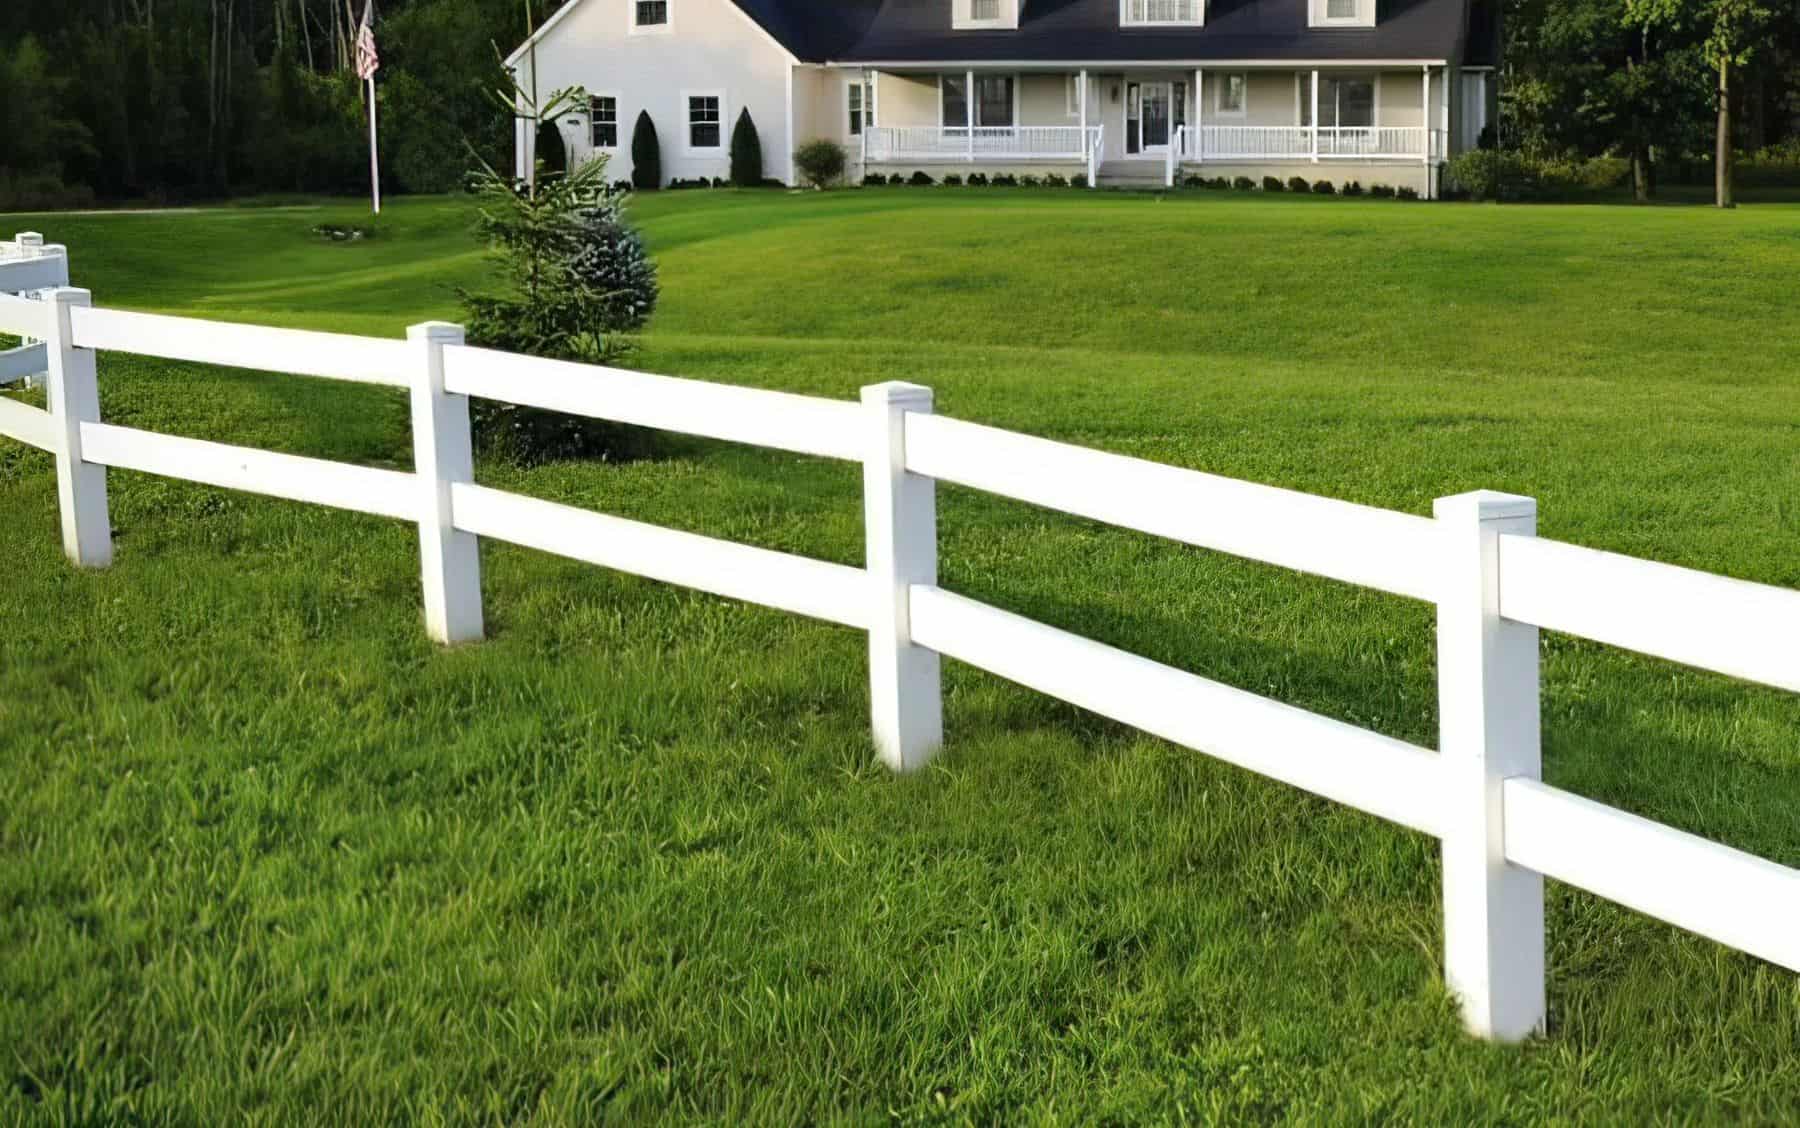 Vinyl 2-rail ranch fence in country setting: Rural home with open field, grassy lawn, and trees in the background.